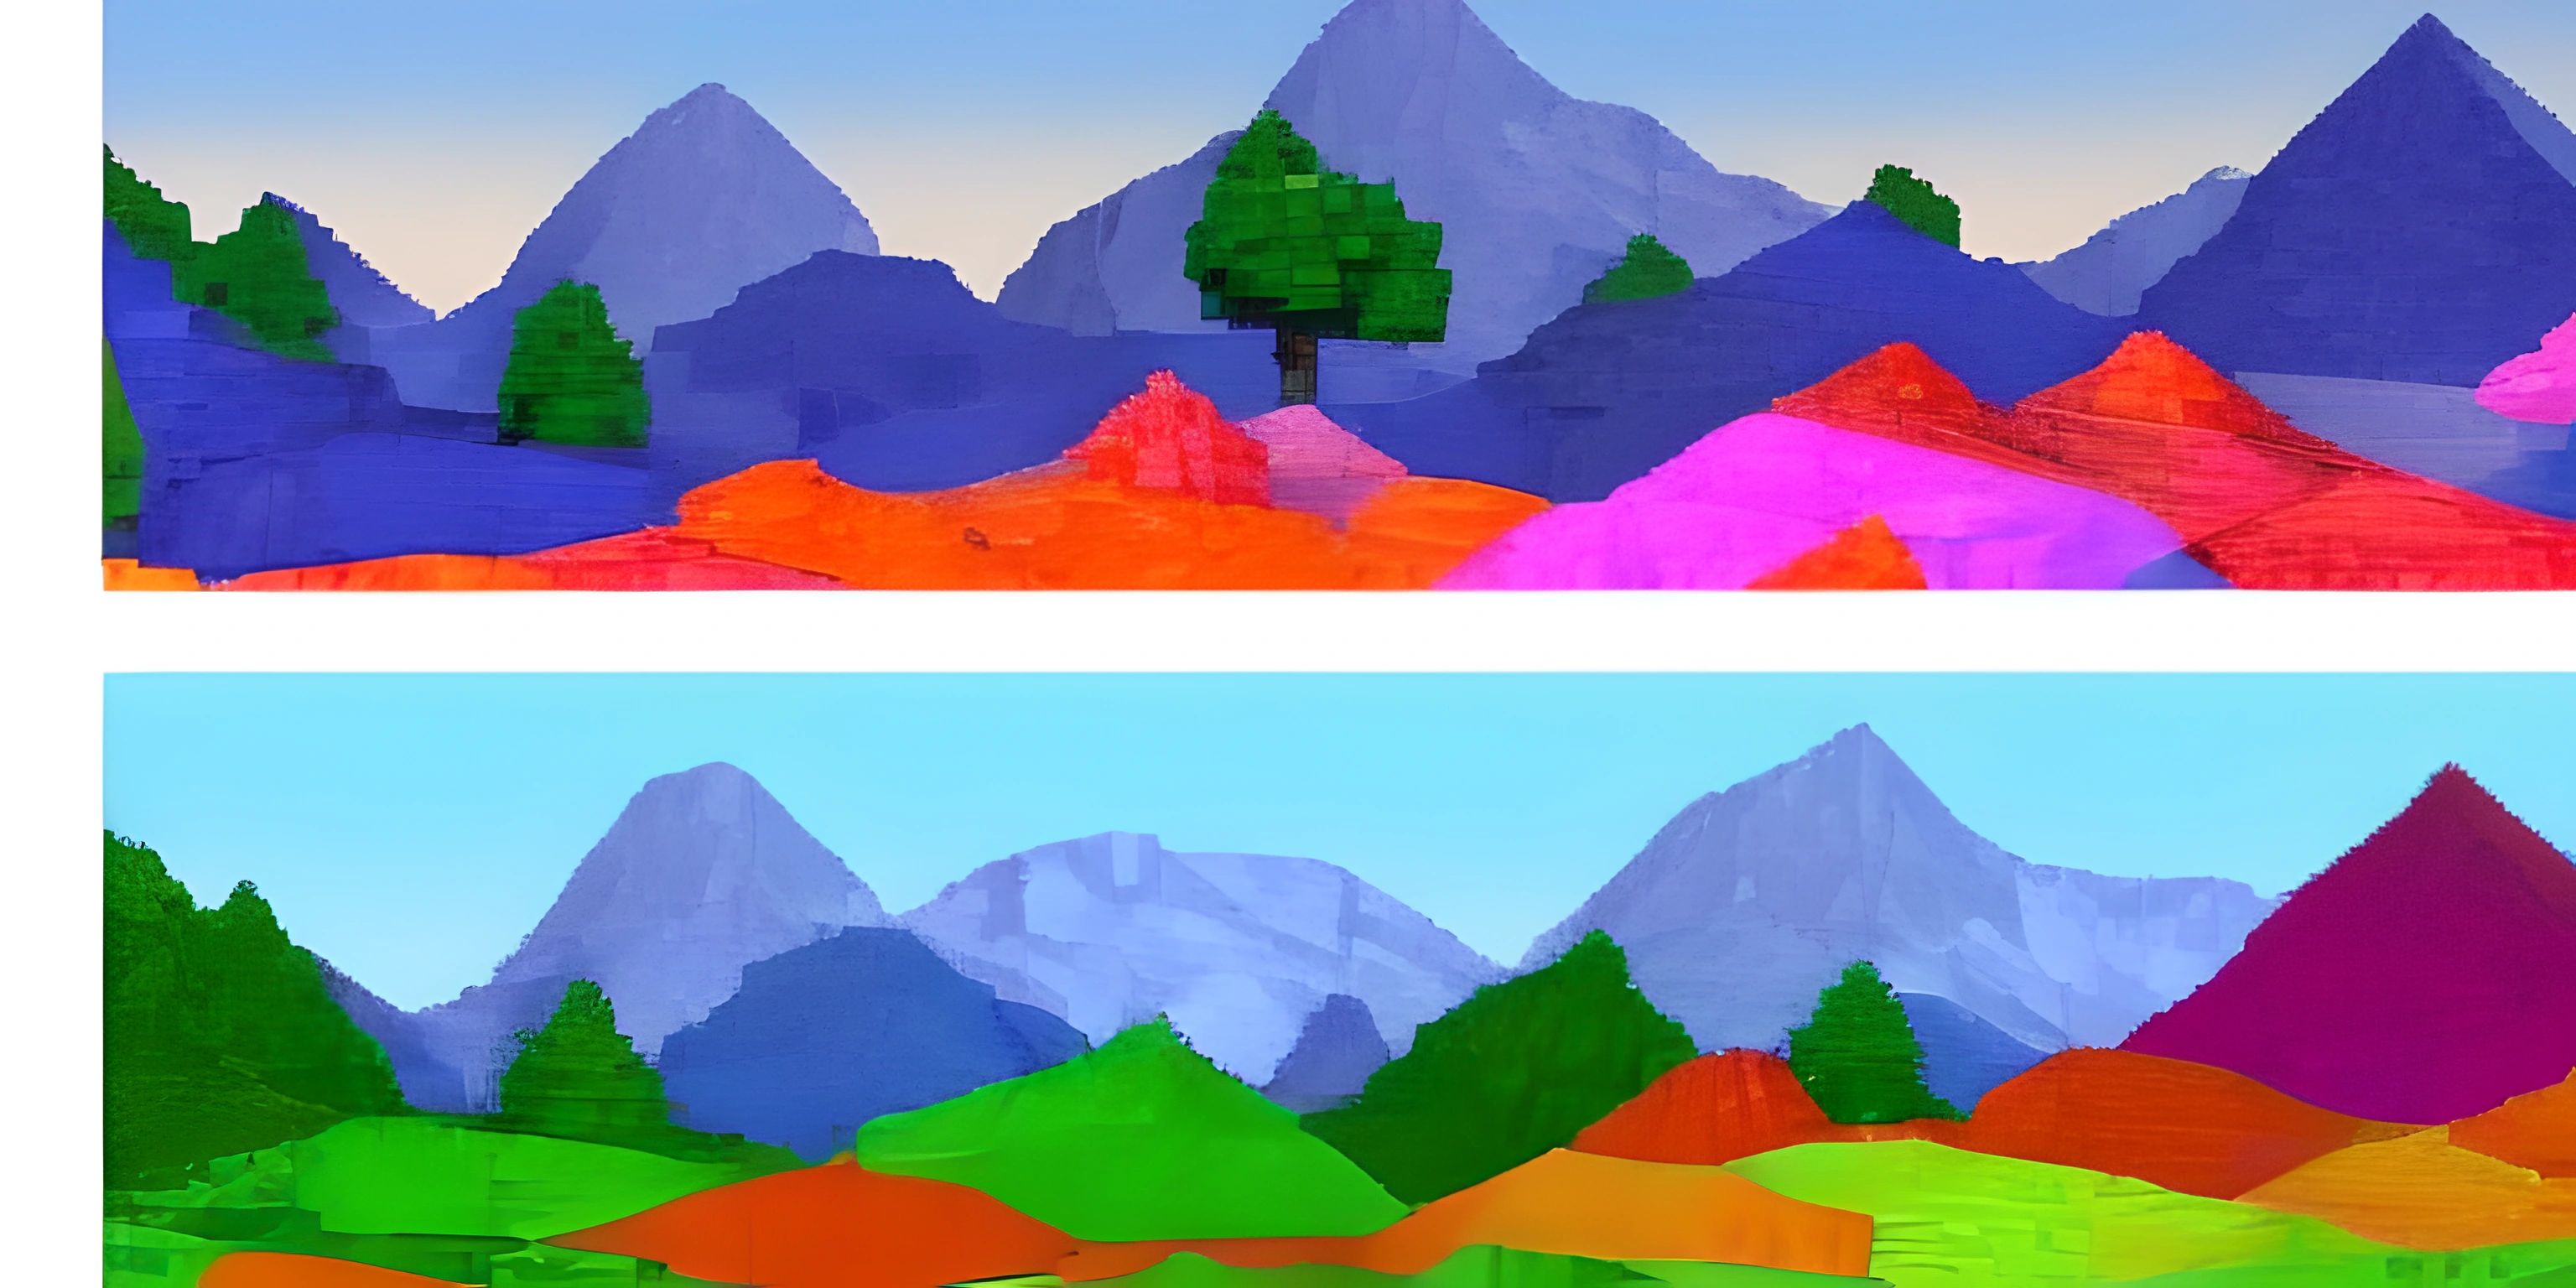 a computer generated image of a landscape with mountains and trees in different colors, one is being colored